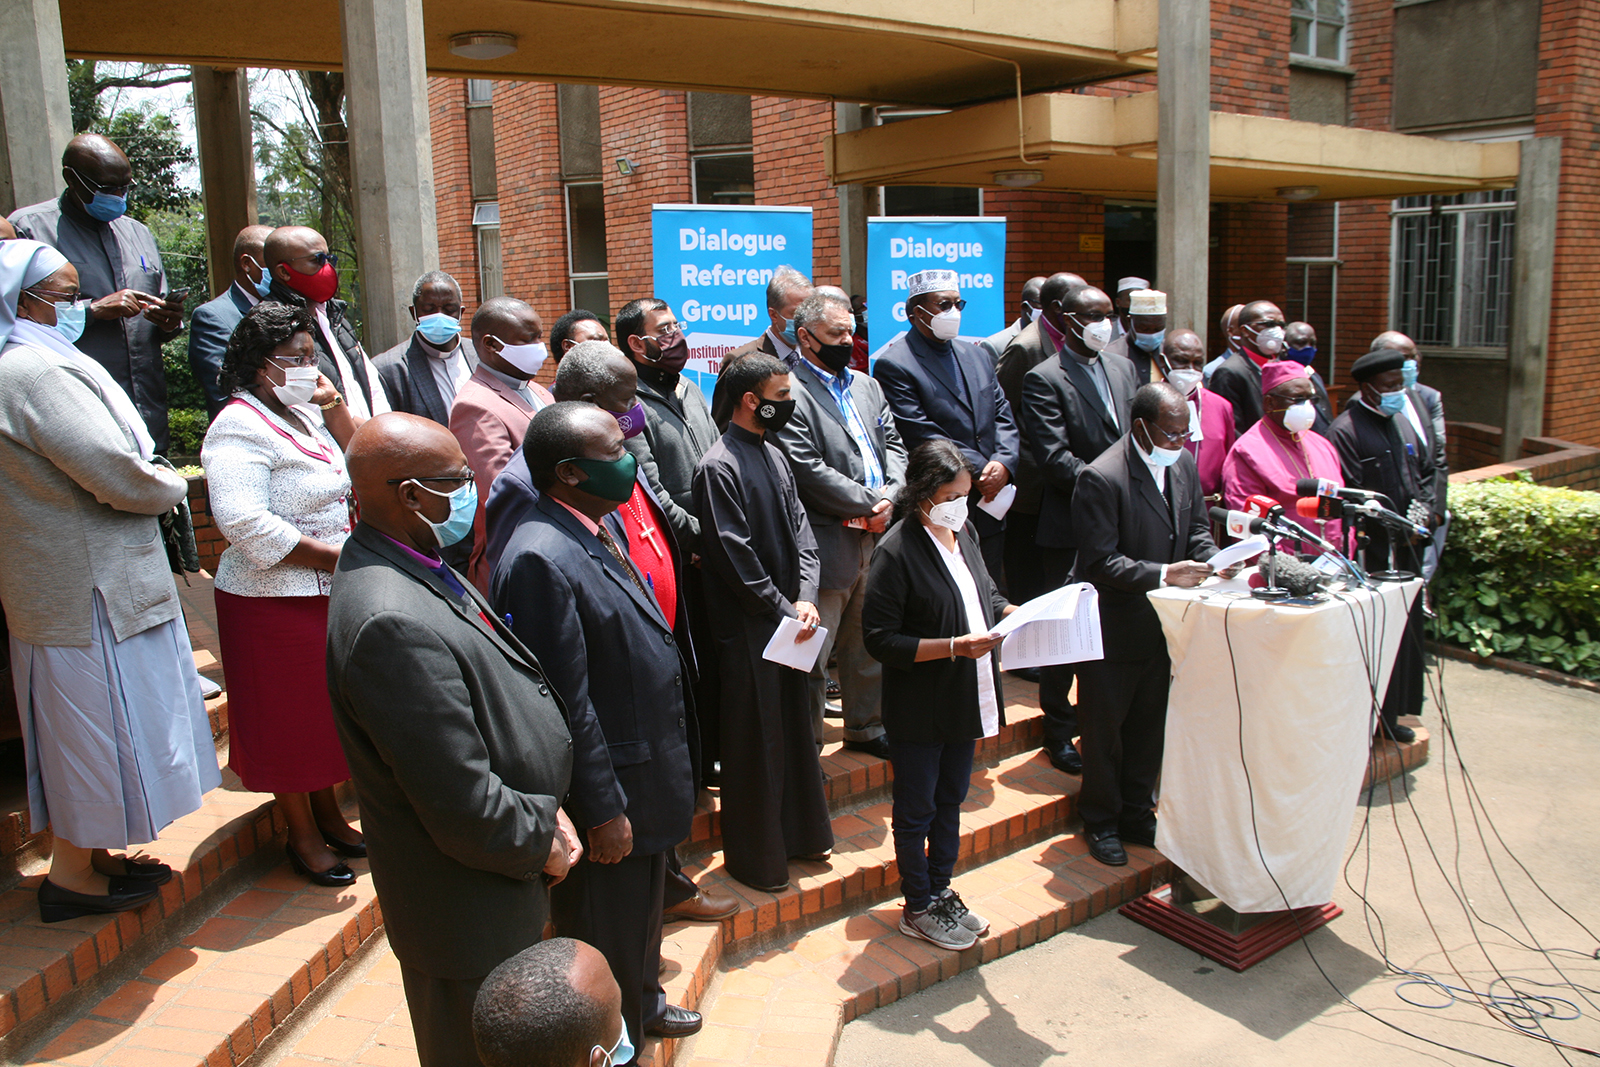 Kenyan religious unite recently under a lobby group known as the Dialogue Reference Group (DRG) to speak about issues affecting the country. RNS photo by Fredrick Nzwili